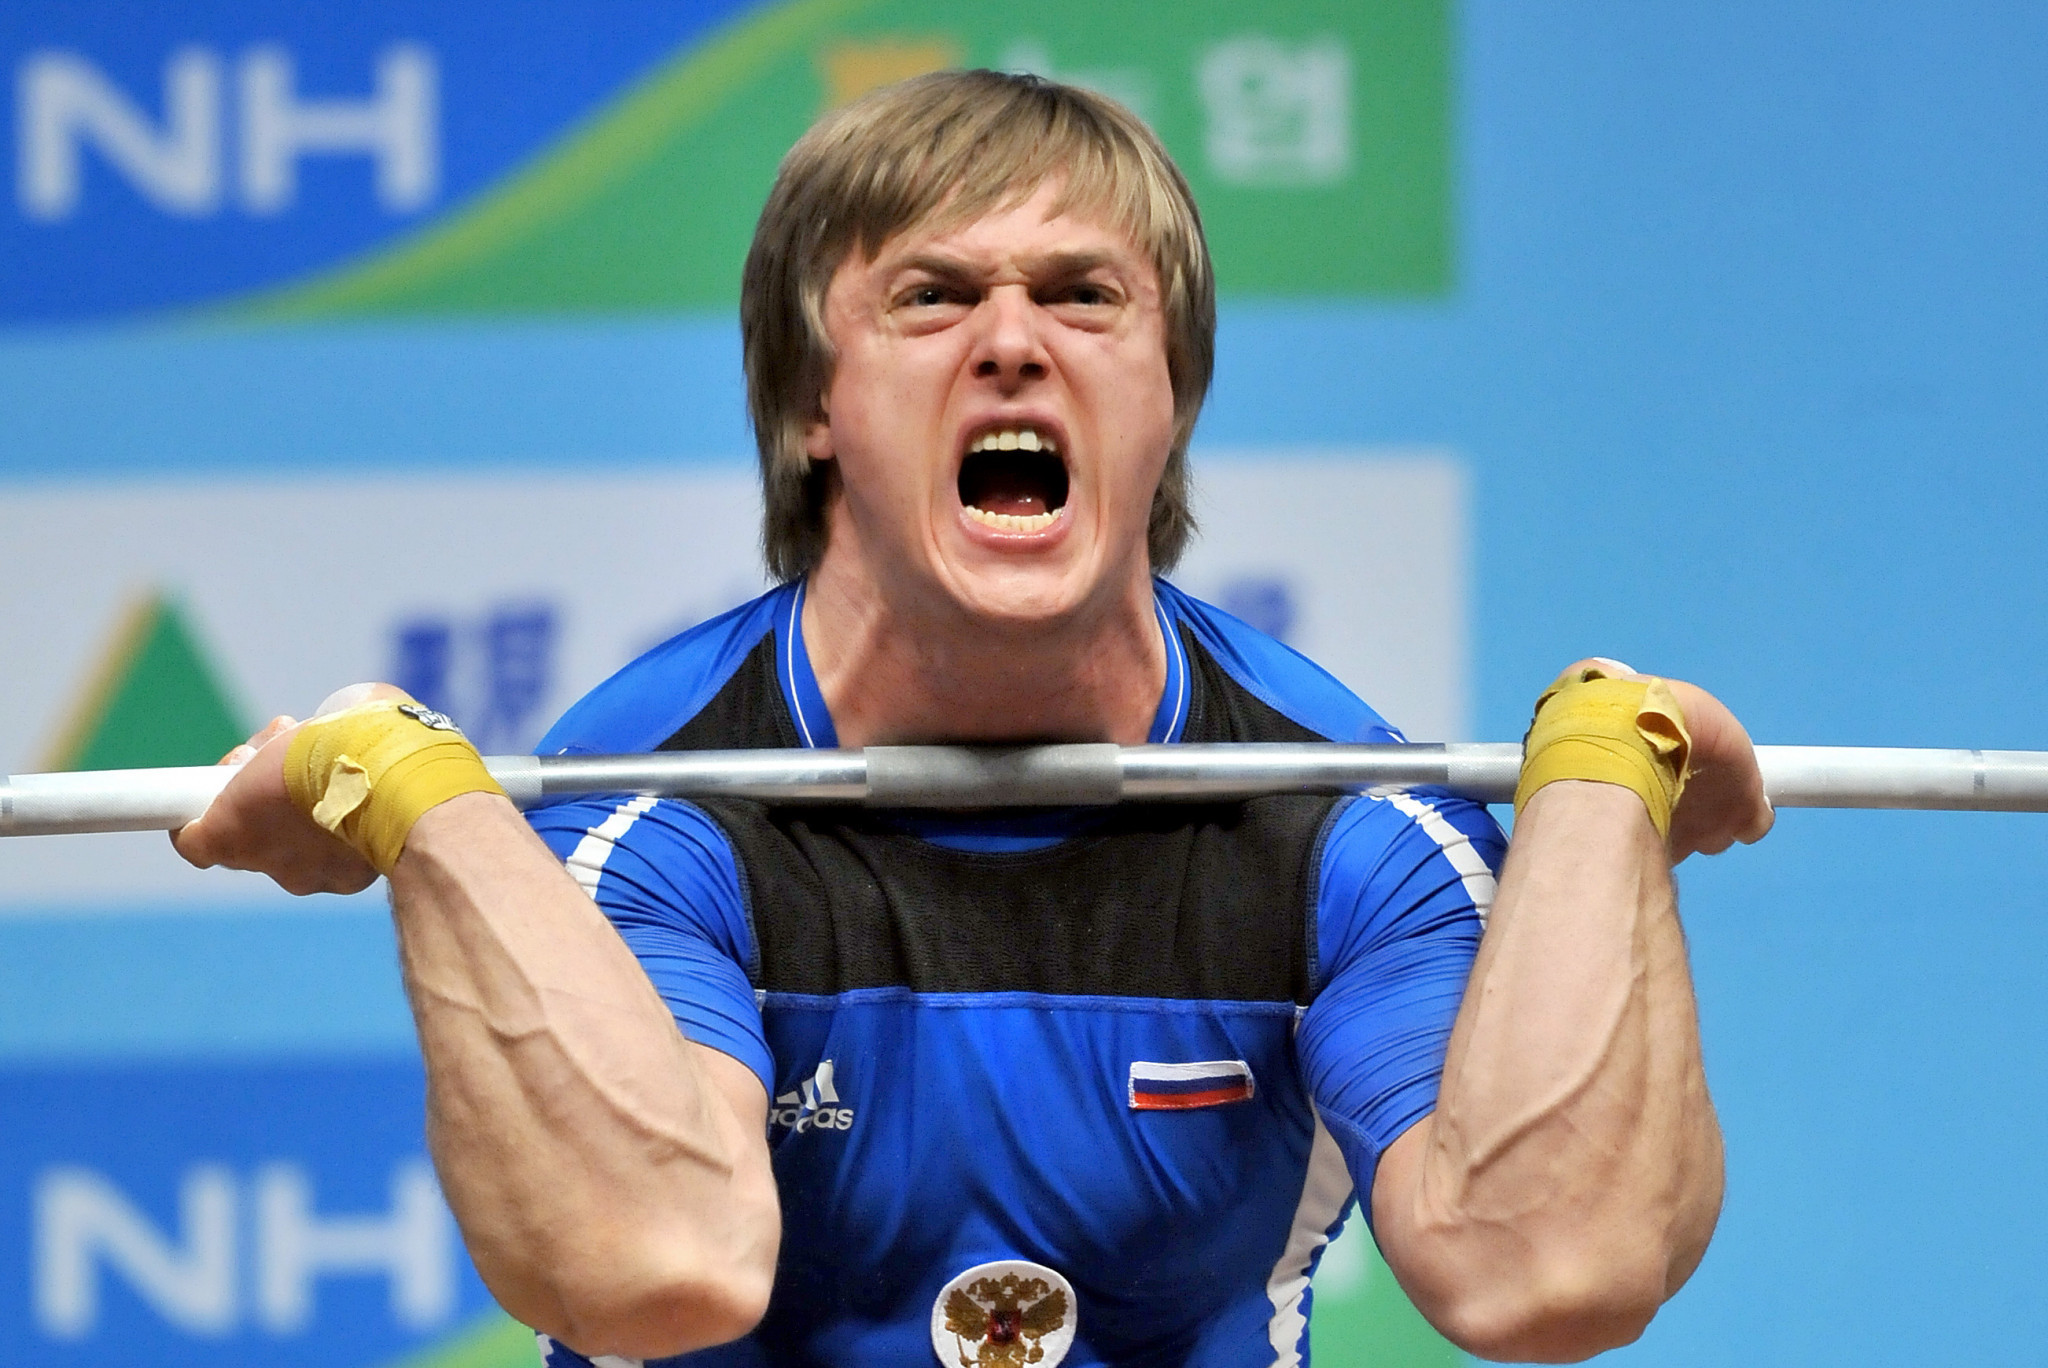 Dmitry Lapikov is among the seven latest weightlifters provisionally suspended by the IWF today ©Getty Images